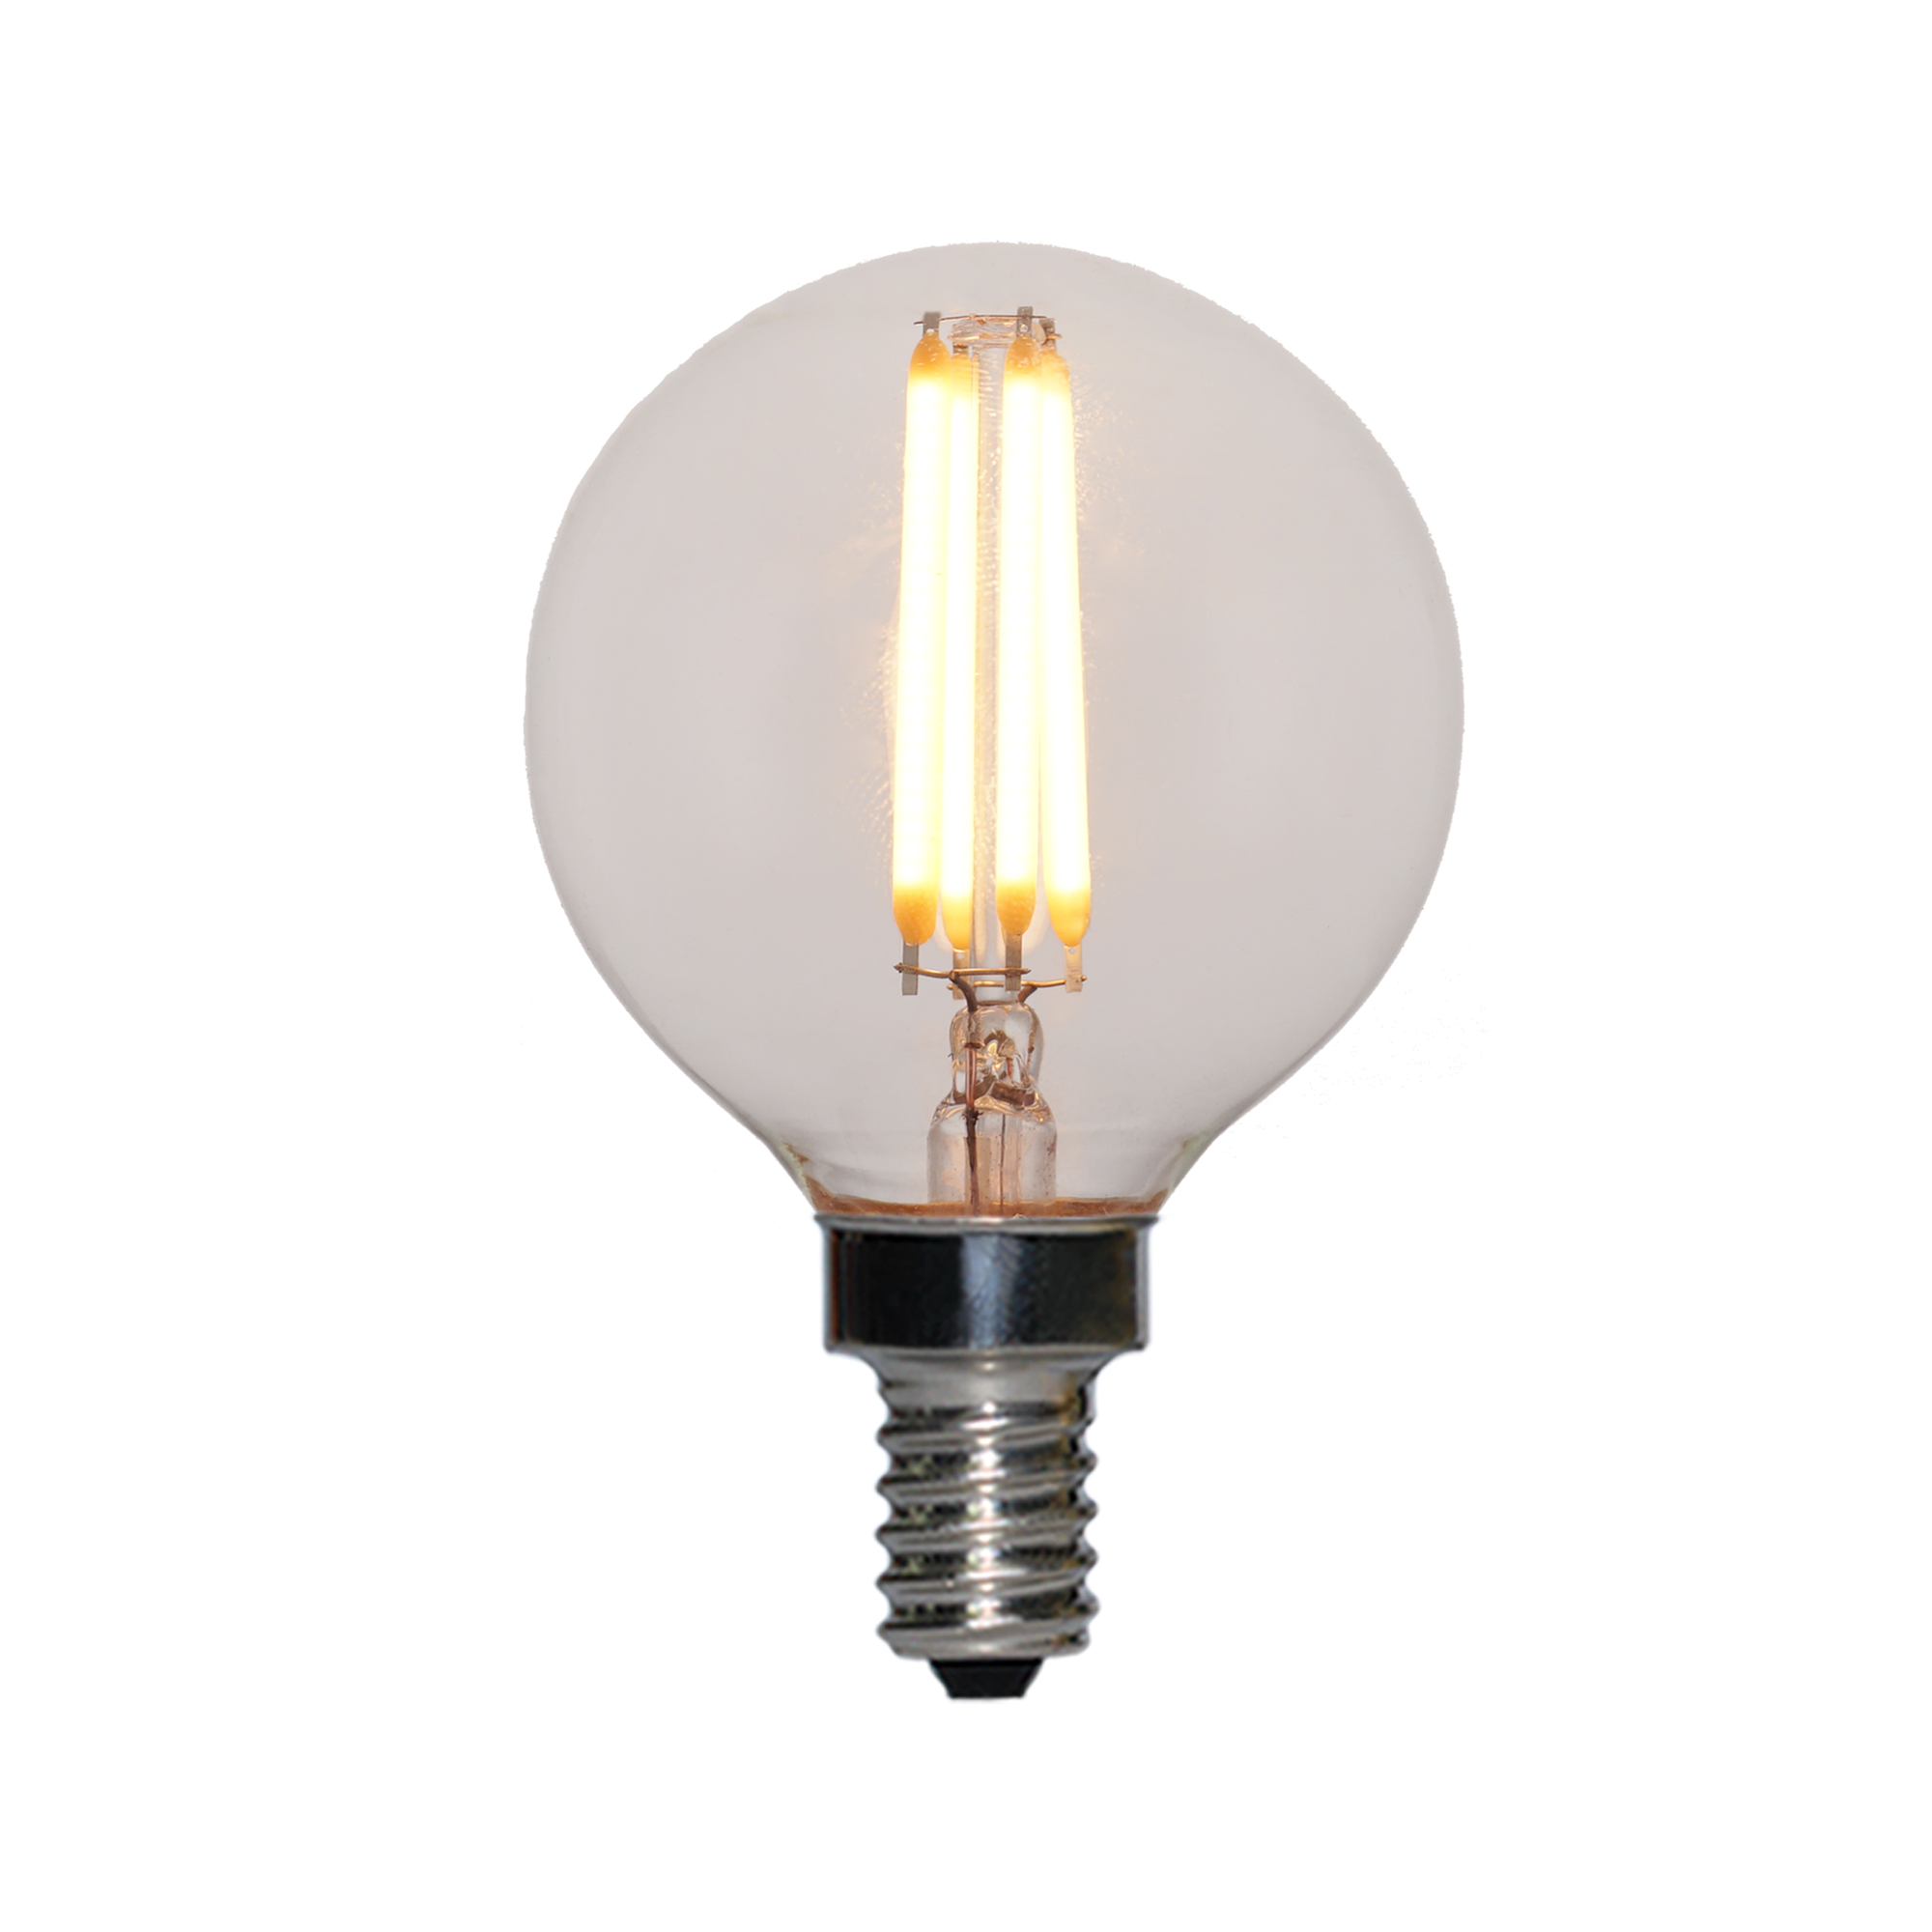 Cheap price Led Filament Light Bulbs -
 UL ES title 20, Title 24 and JA8 Certified  listed led Edison bulbs G16.5 A19 S19 S21 G25 G30 G40  – Omita